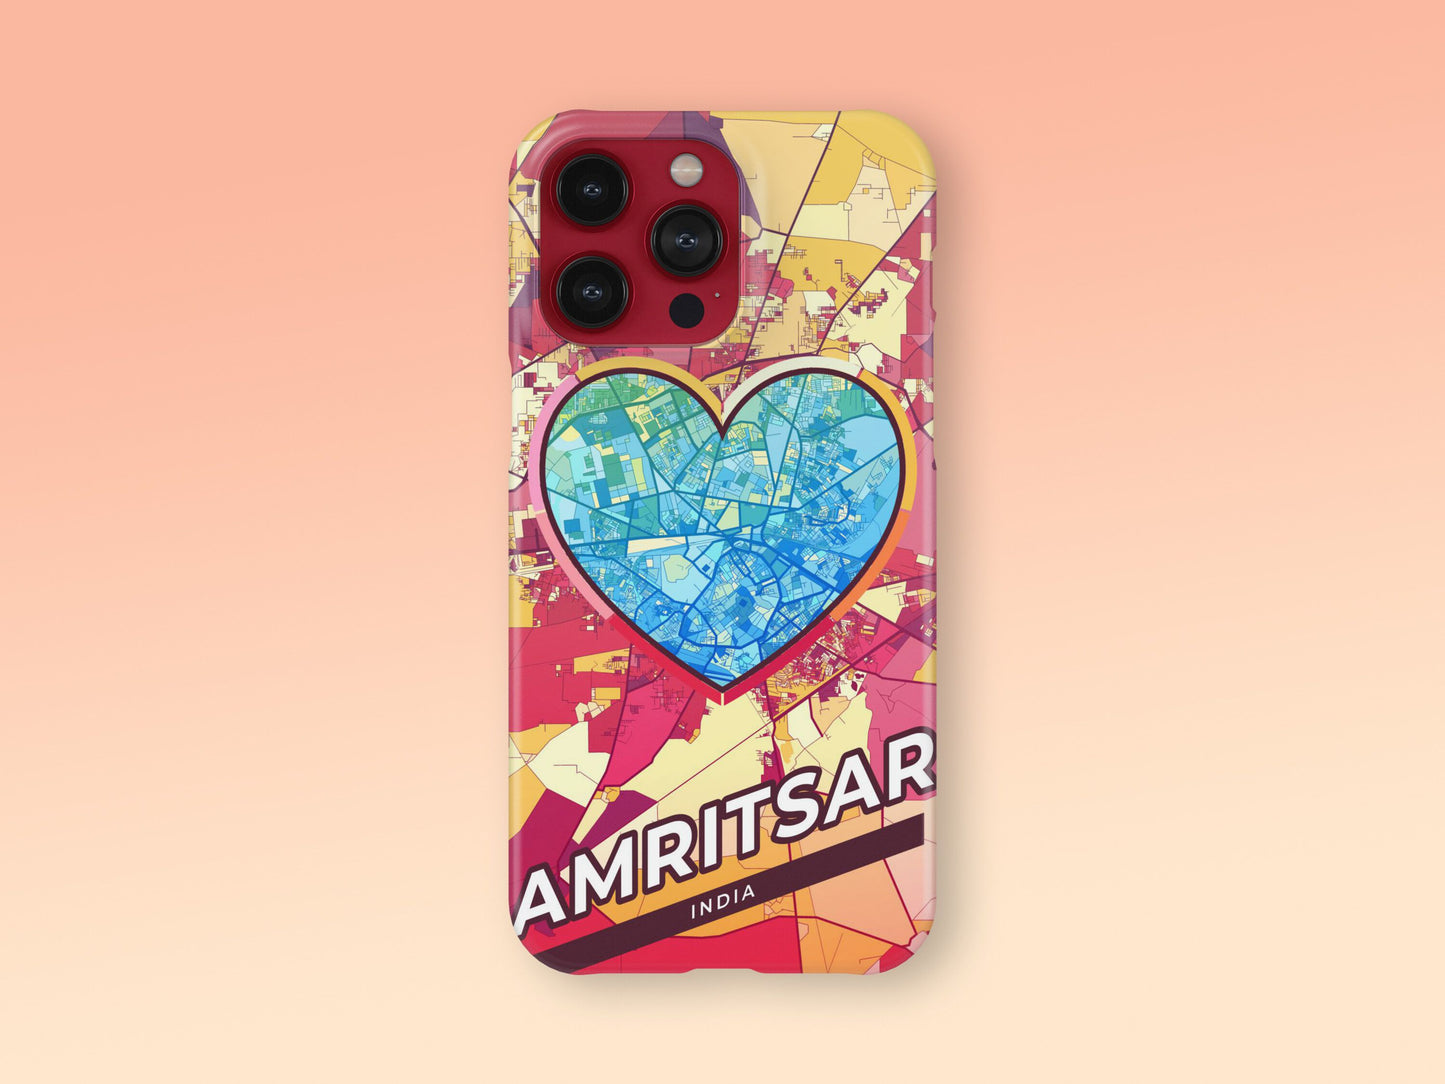 Amritsar India slim phone case with colorful icon. Birthday, wedding or housewarming gift. Couple match cases. 2